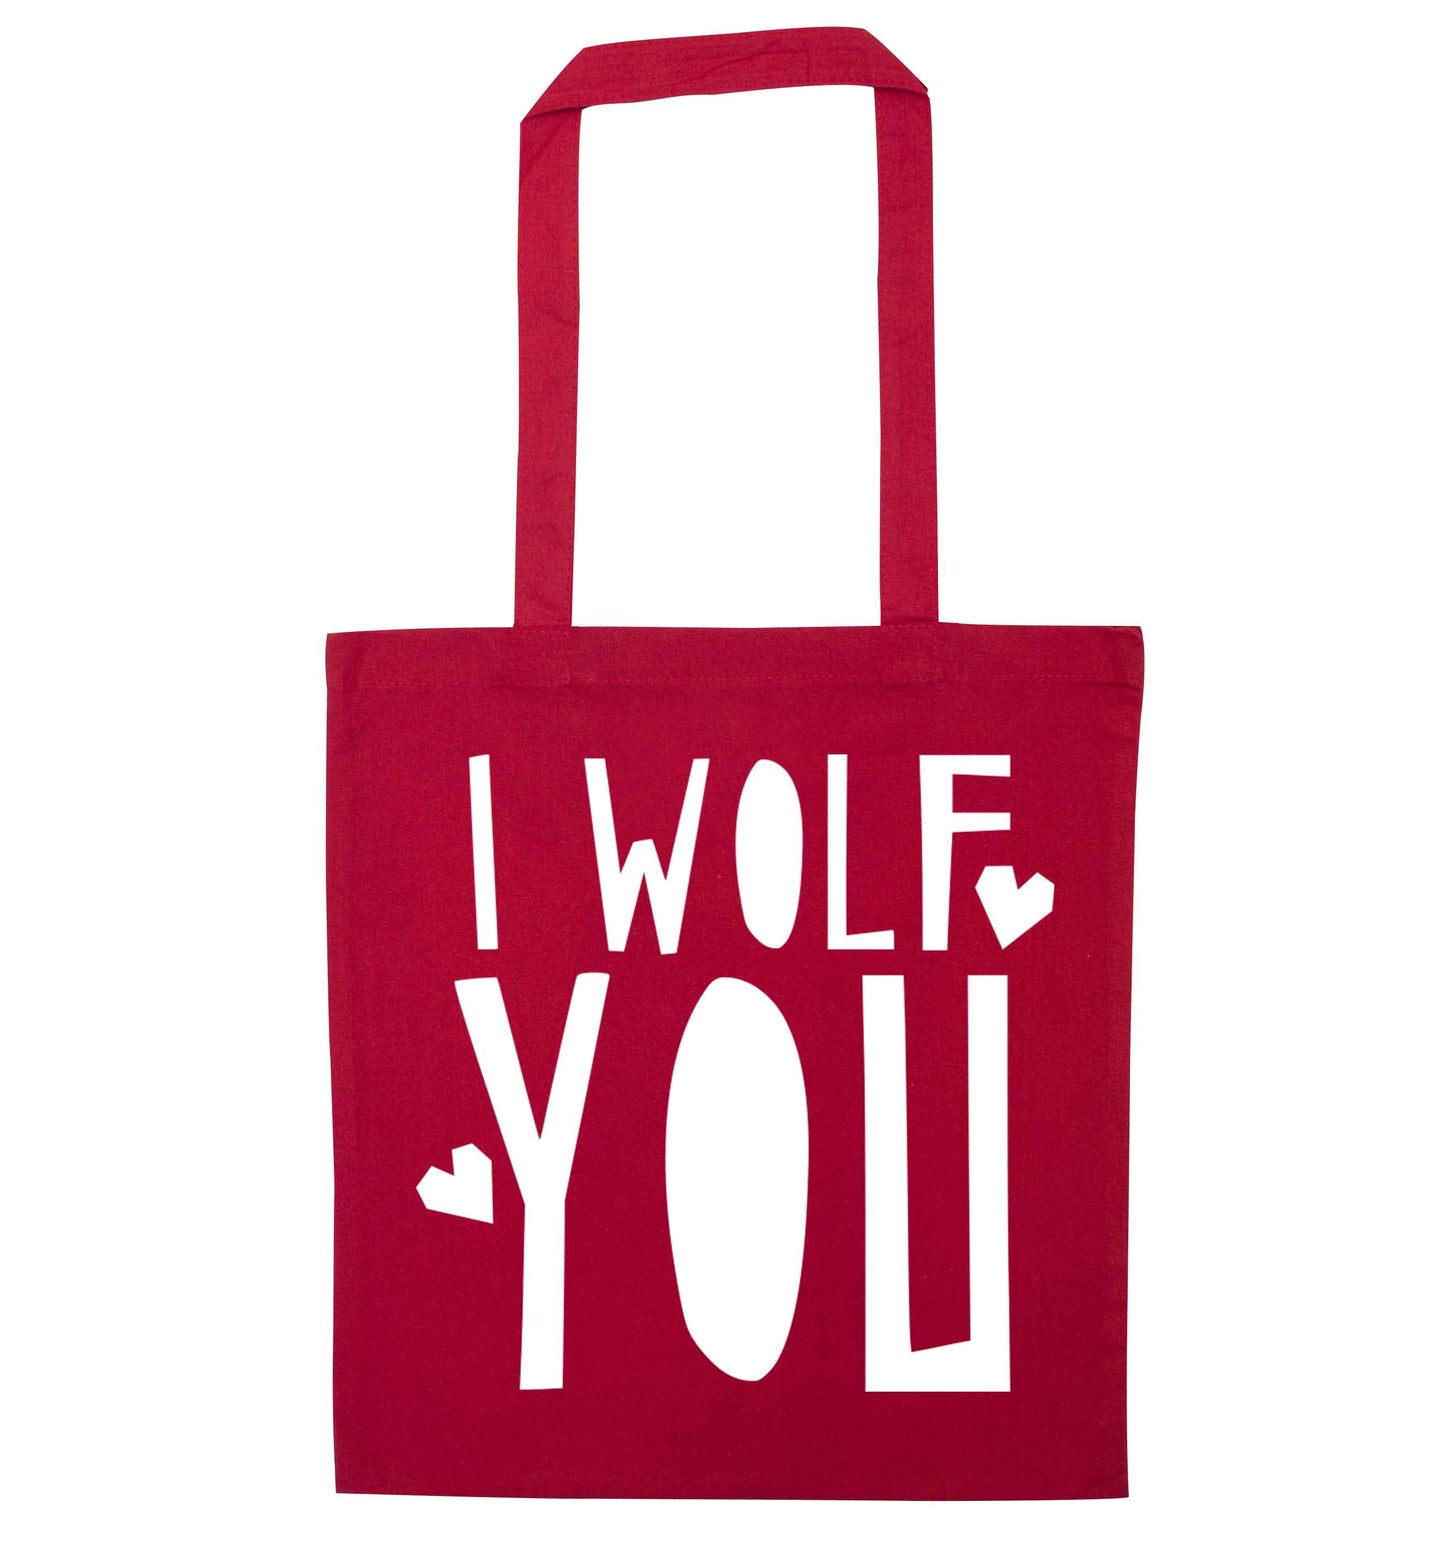 I wolf you red tote bag